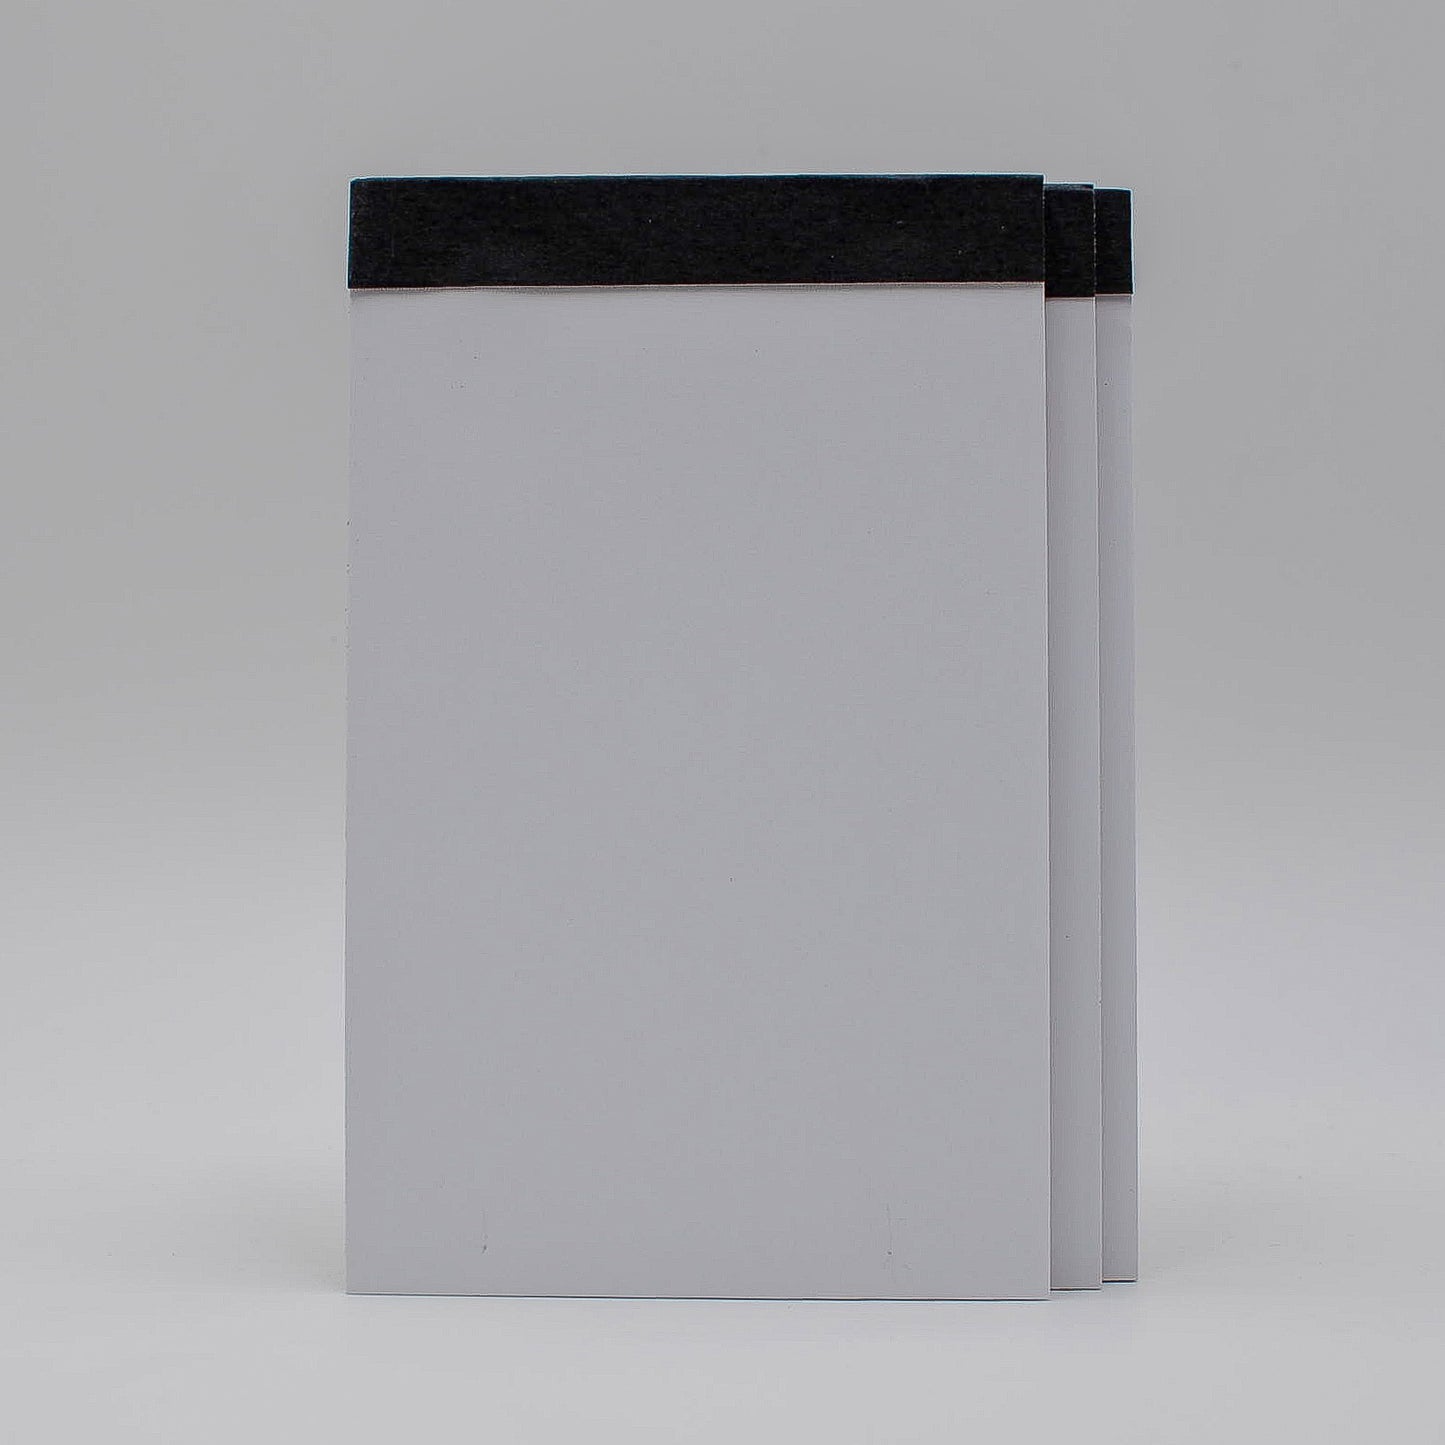 5 X 8 Memo Pads blank white note book perforated pages notes sheets